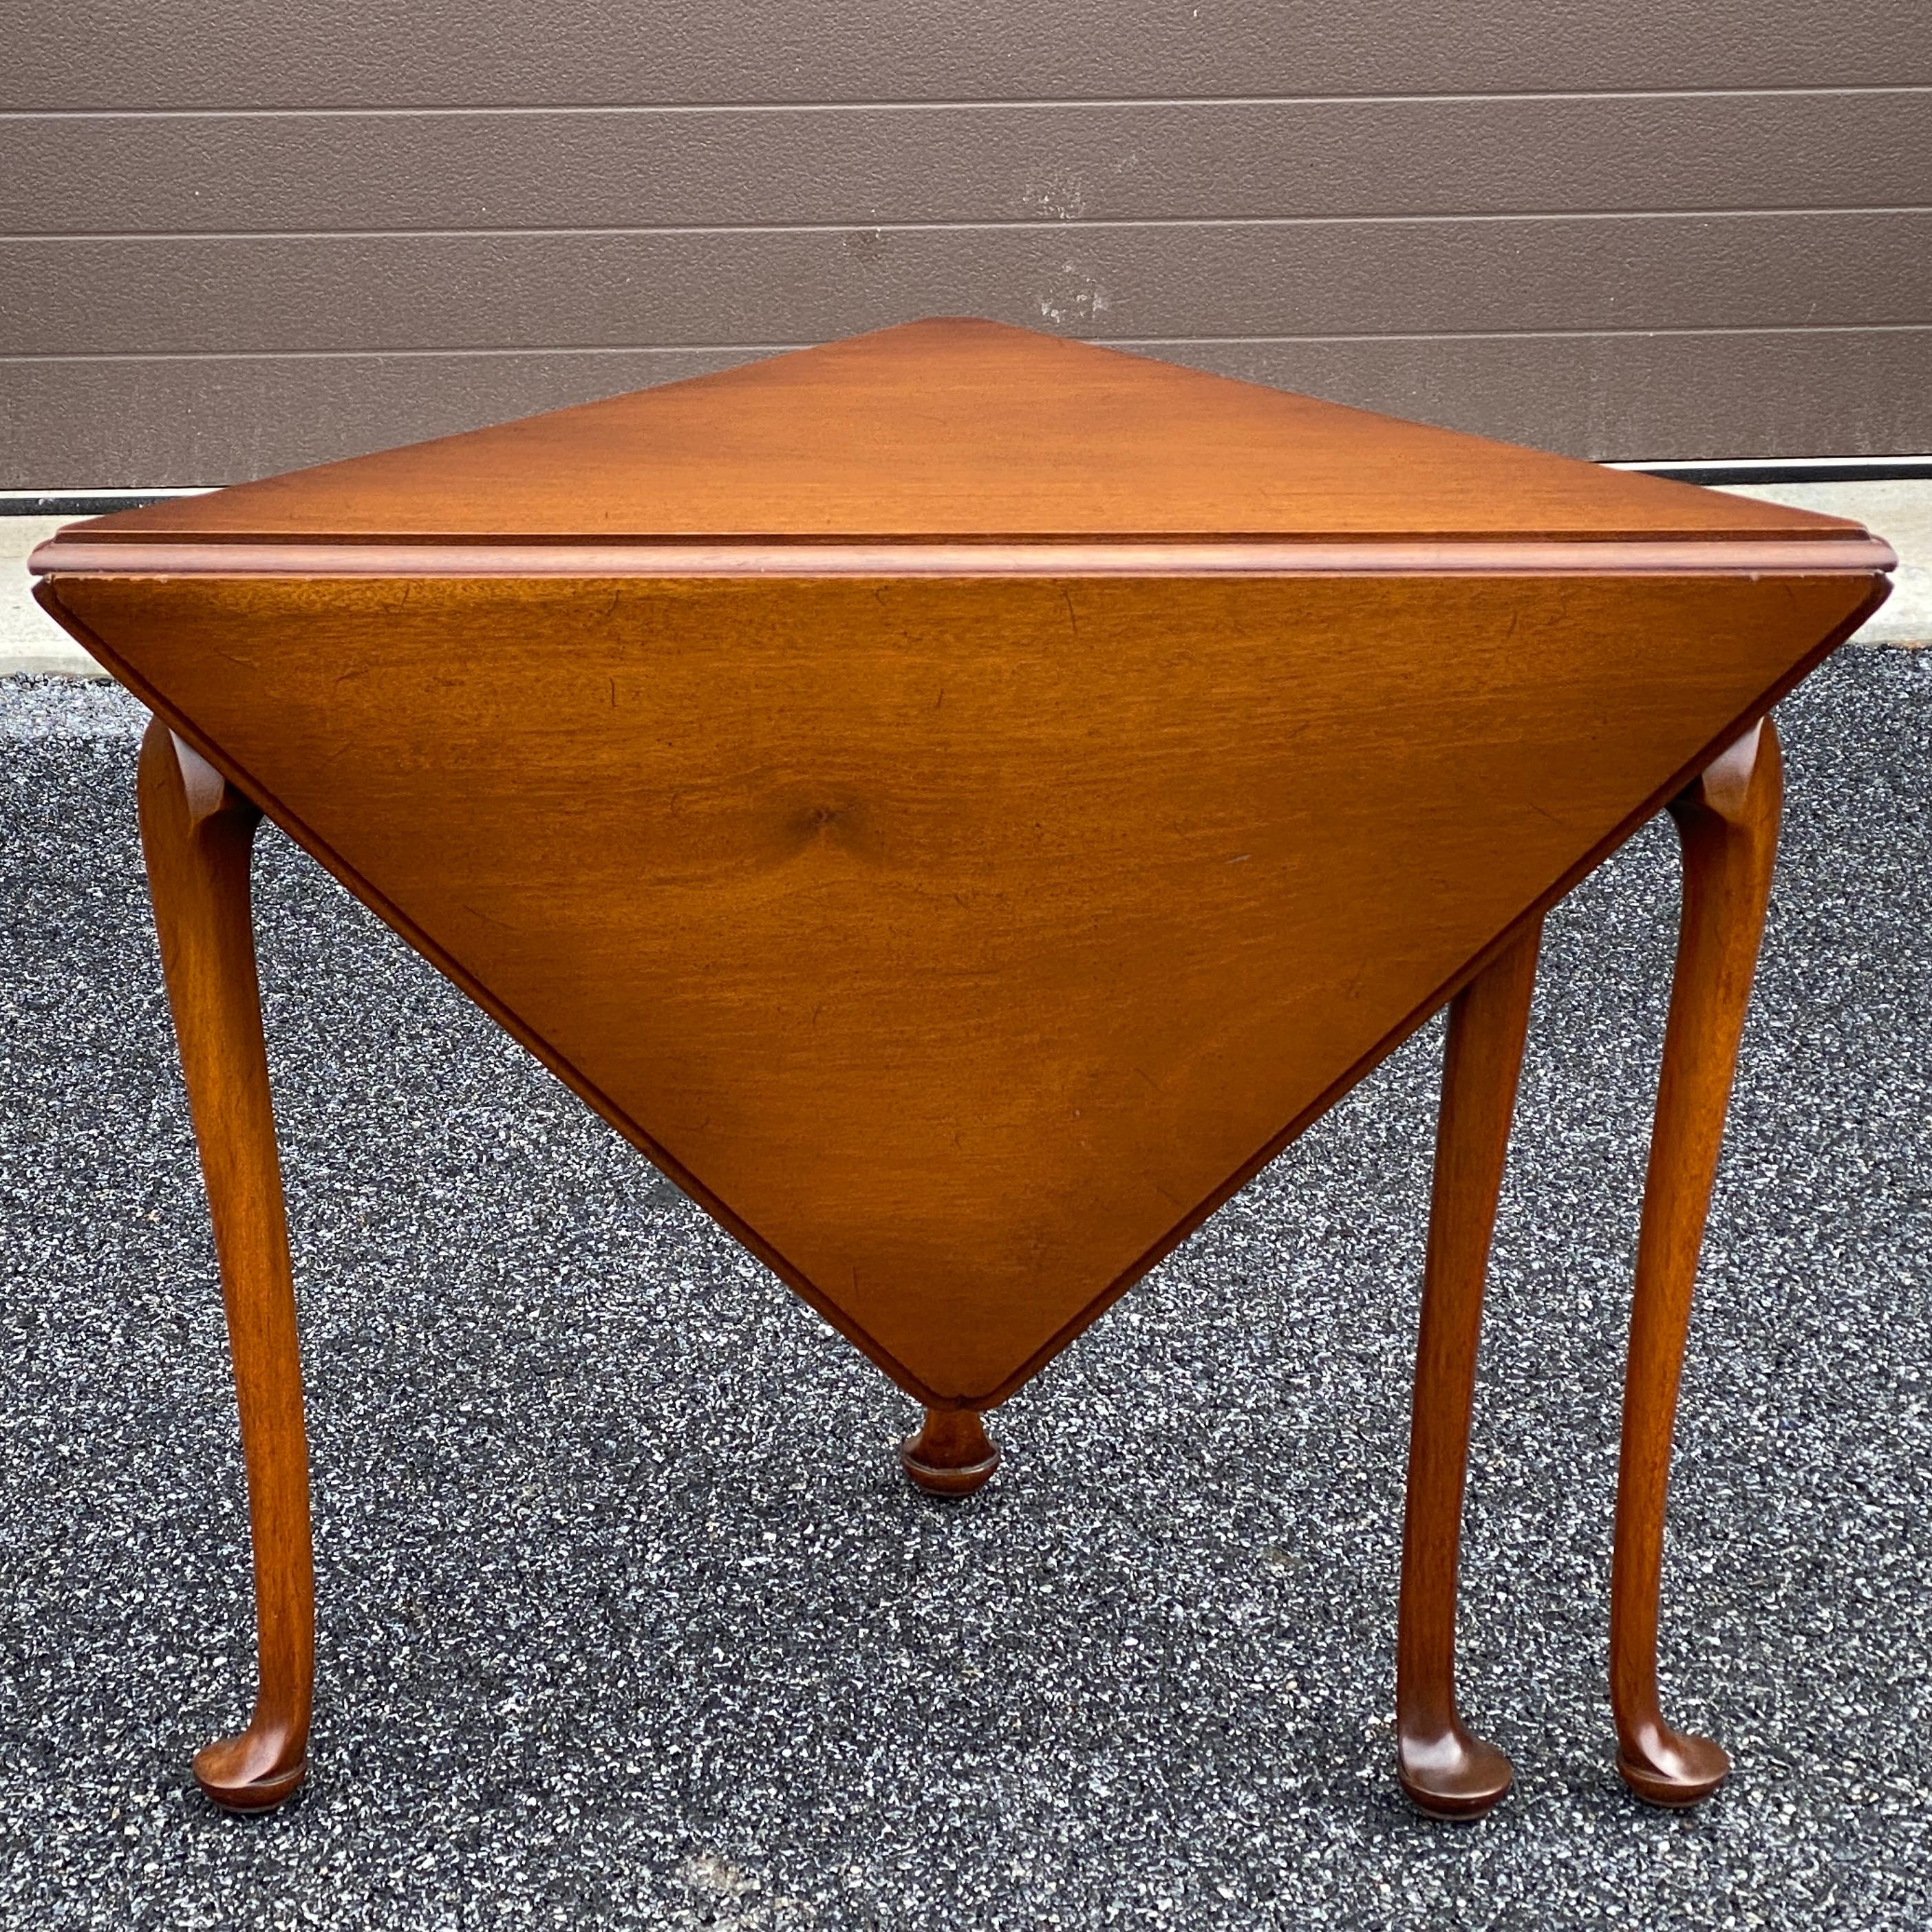 Biggs Queen Anne Mahogany Gate Leg Drop Leaf Napkin Side Table In Good Condition For Sale In West Chester, PA